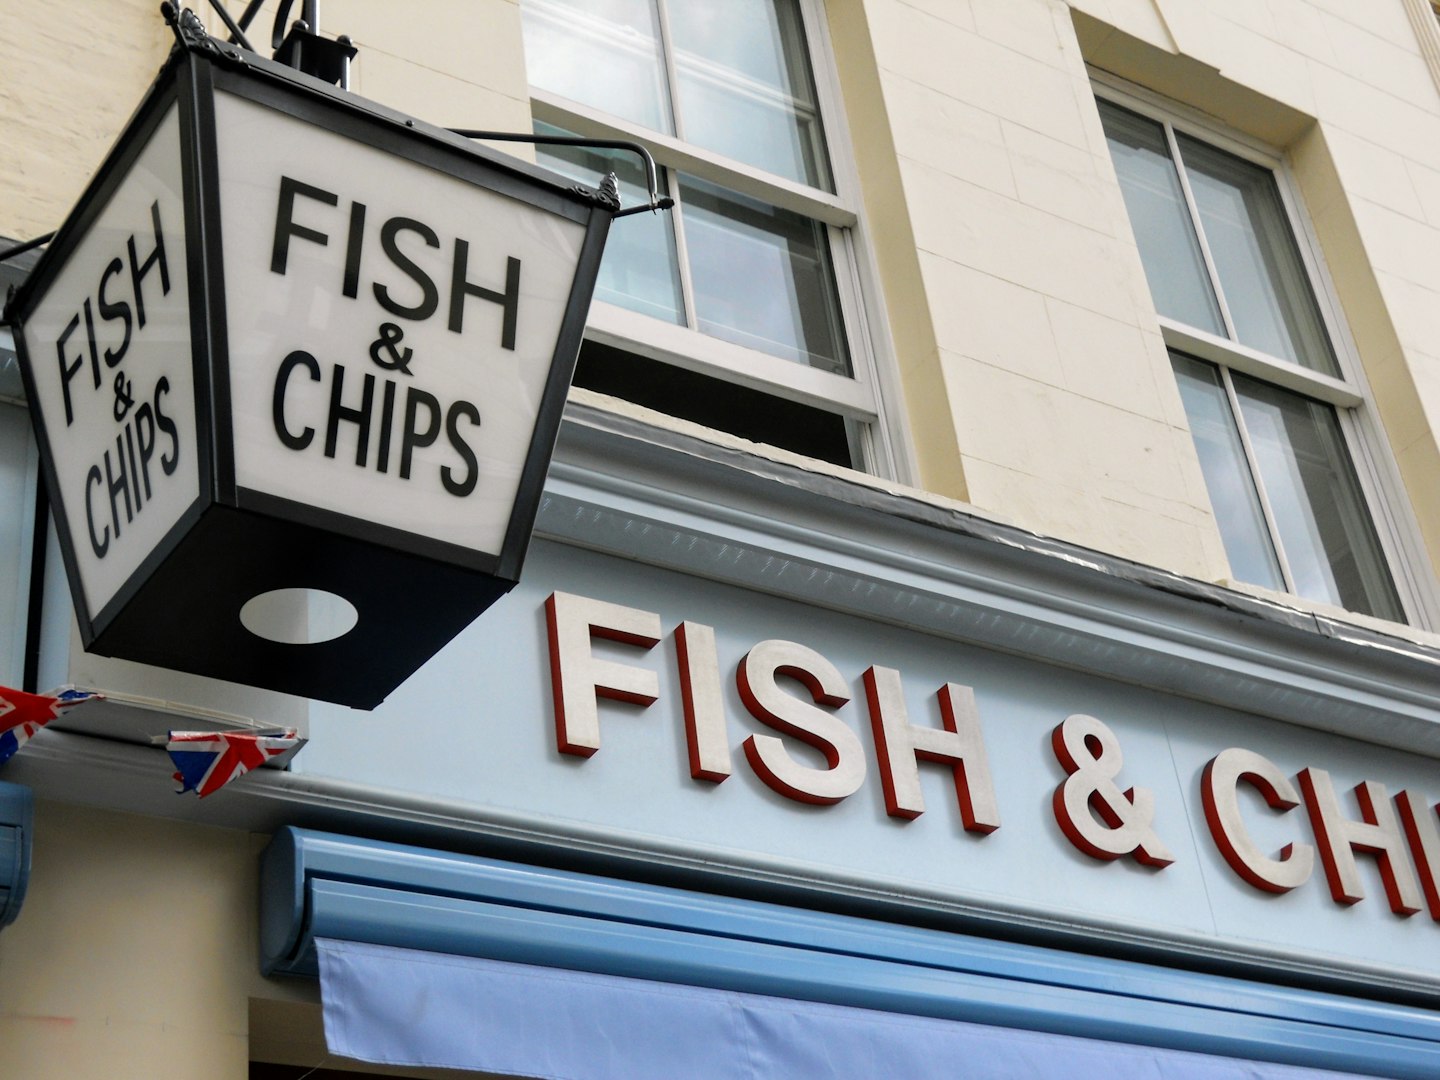 Fish and chip shop healthy option